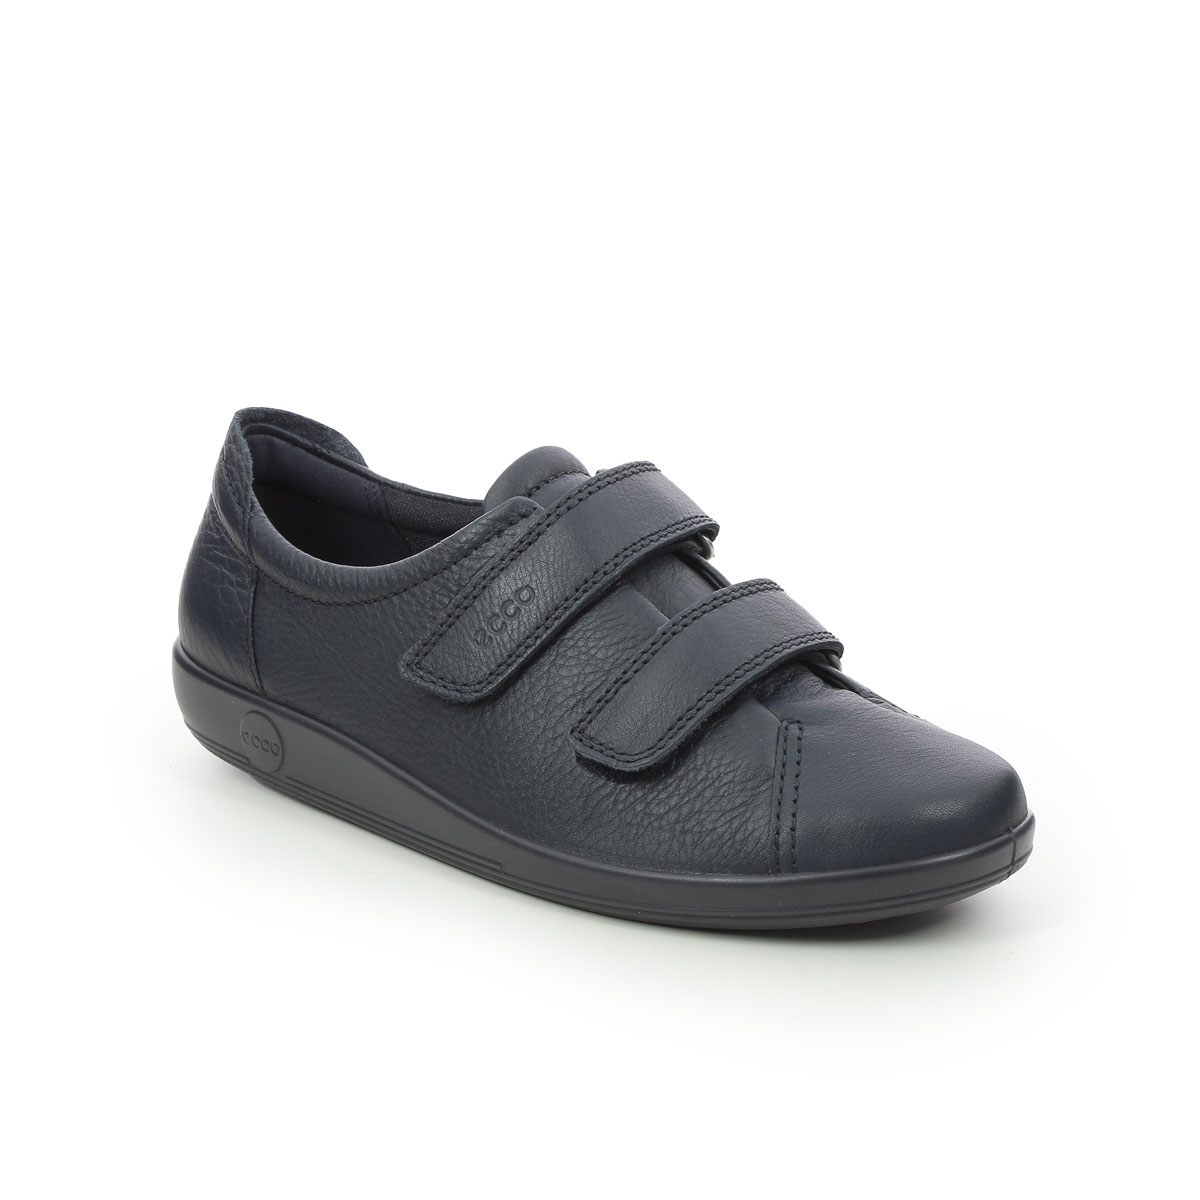 ECCO Soft 2V Navy Leather velcro shoes